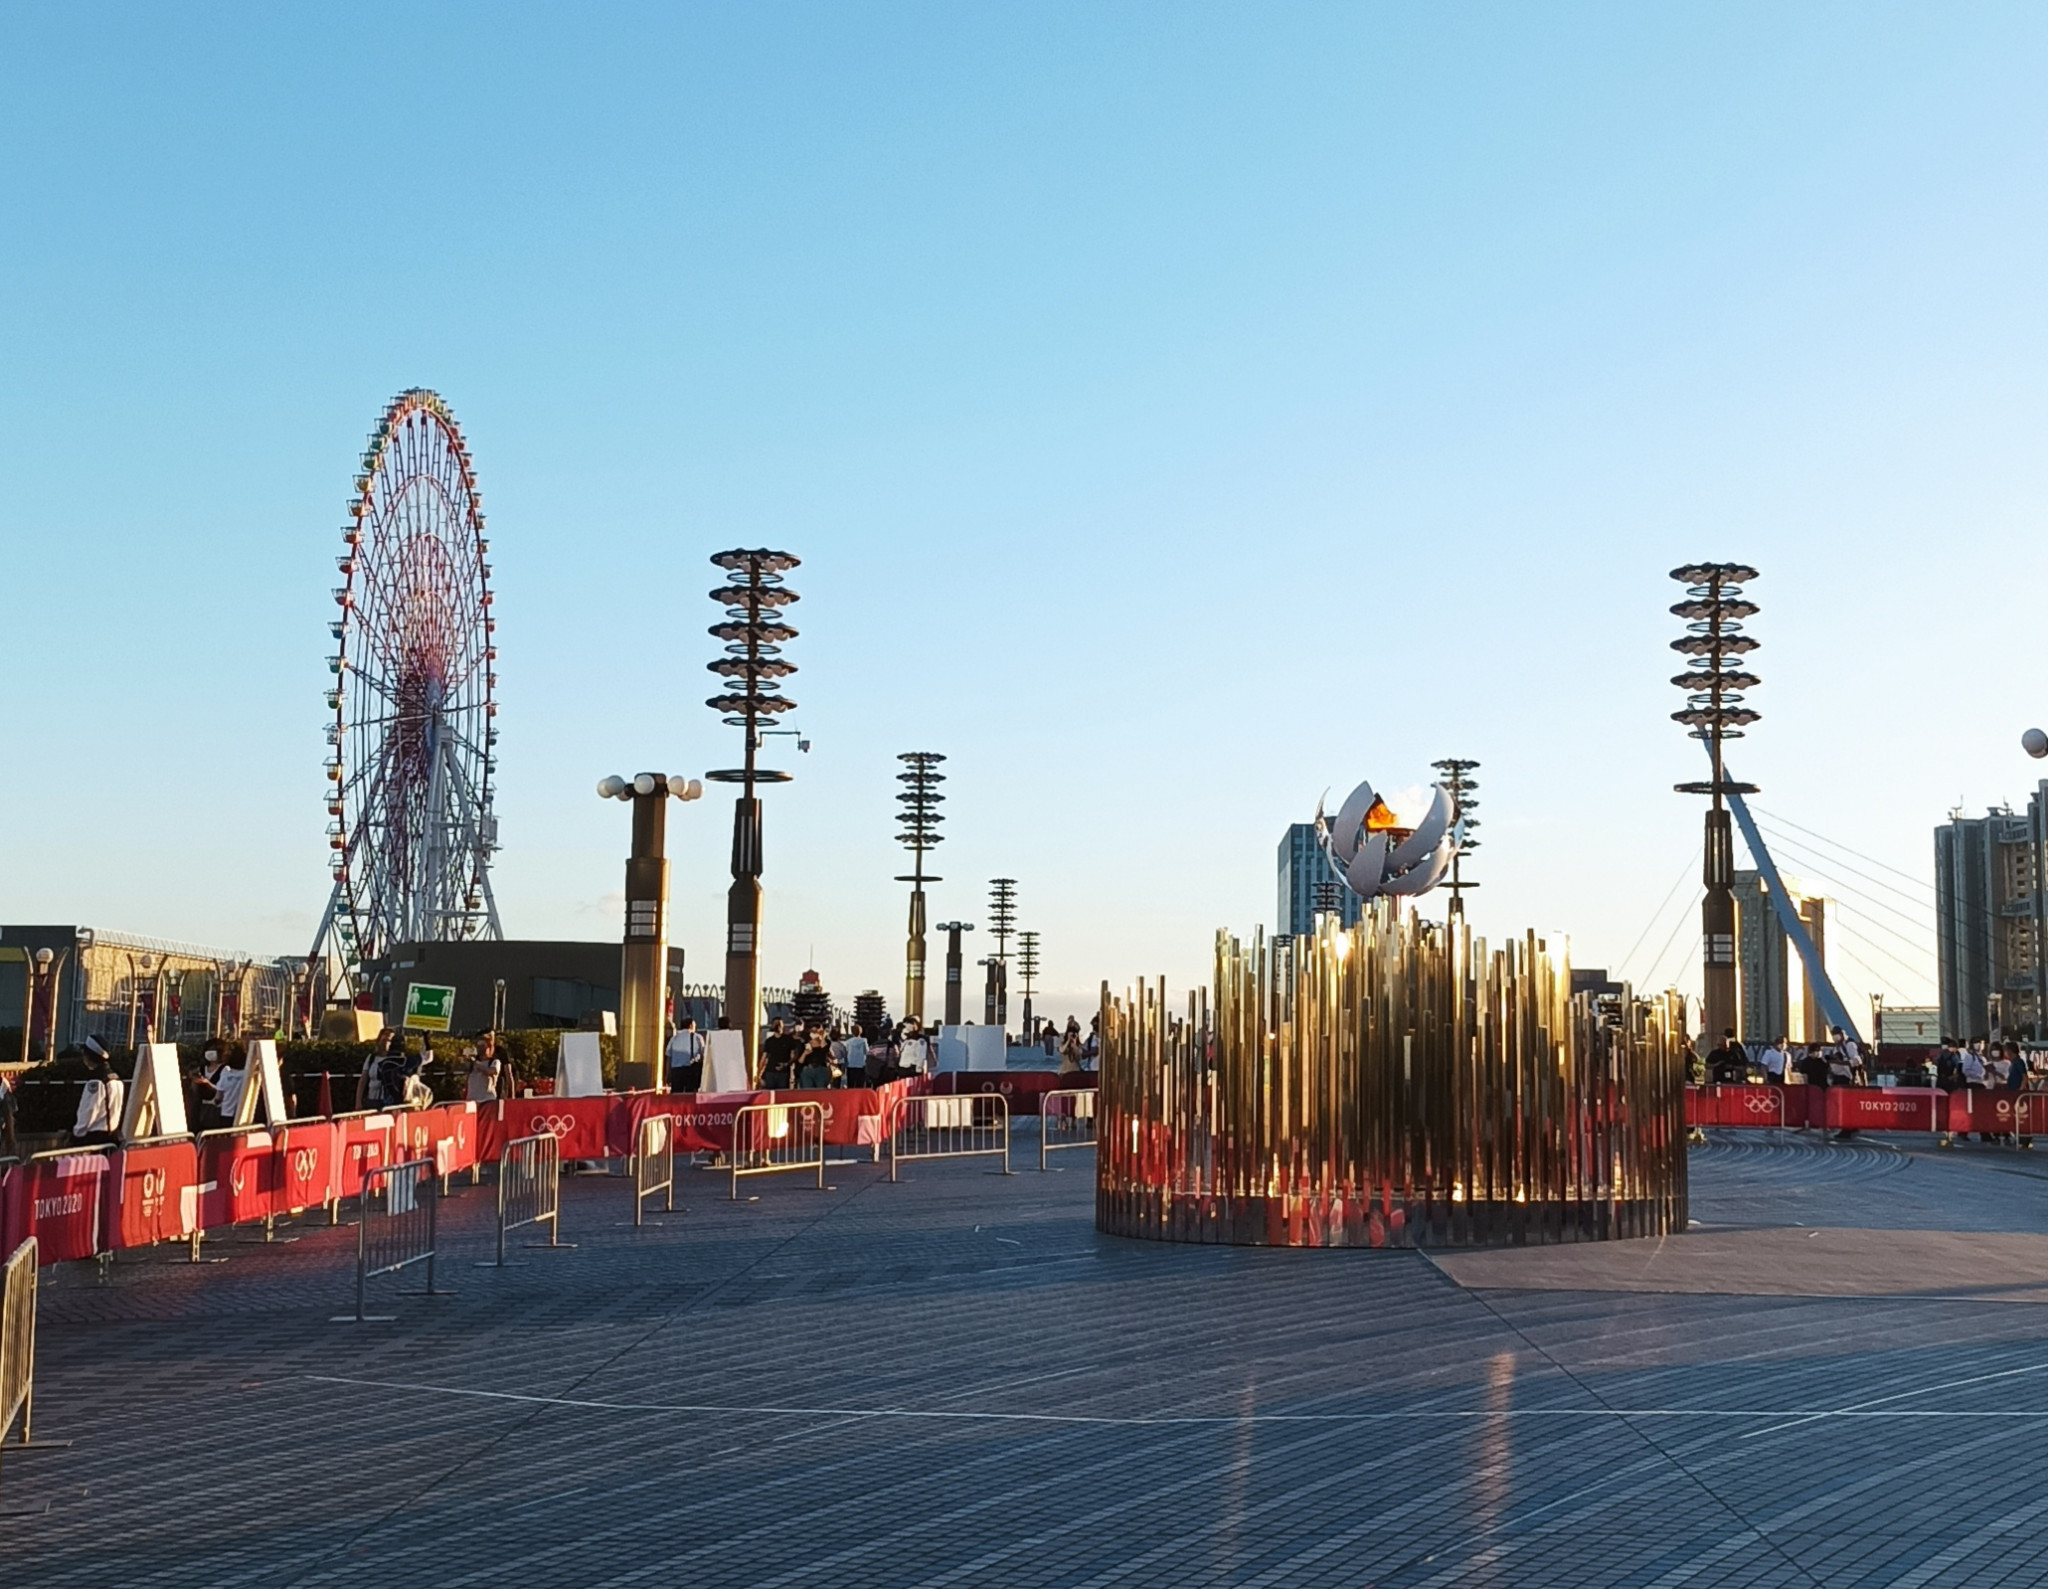 The Tokyo Olympic Flame was kept on the waterfront for the duration of the Games ©ITG